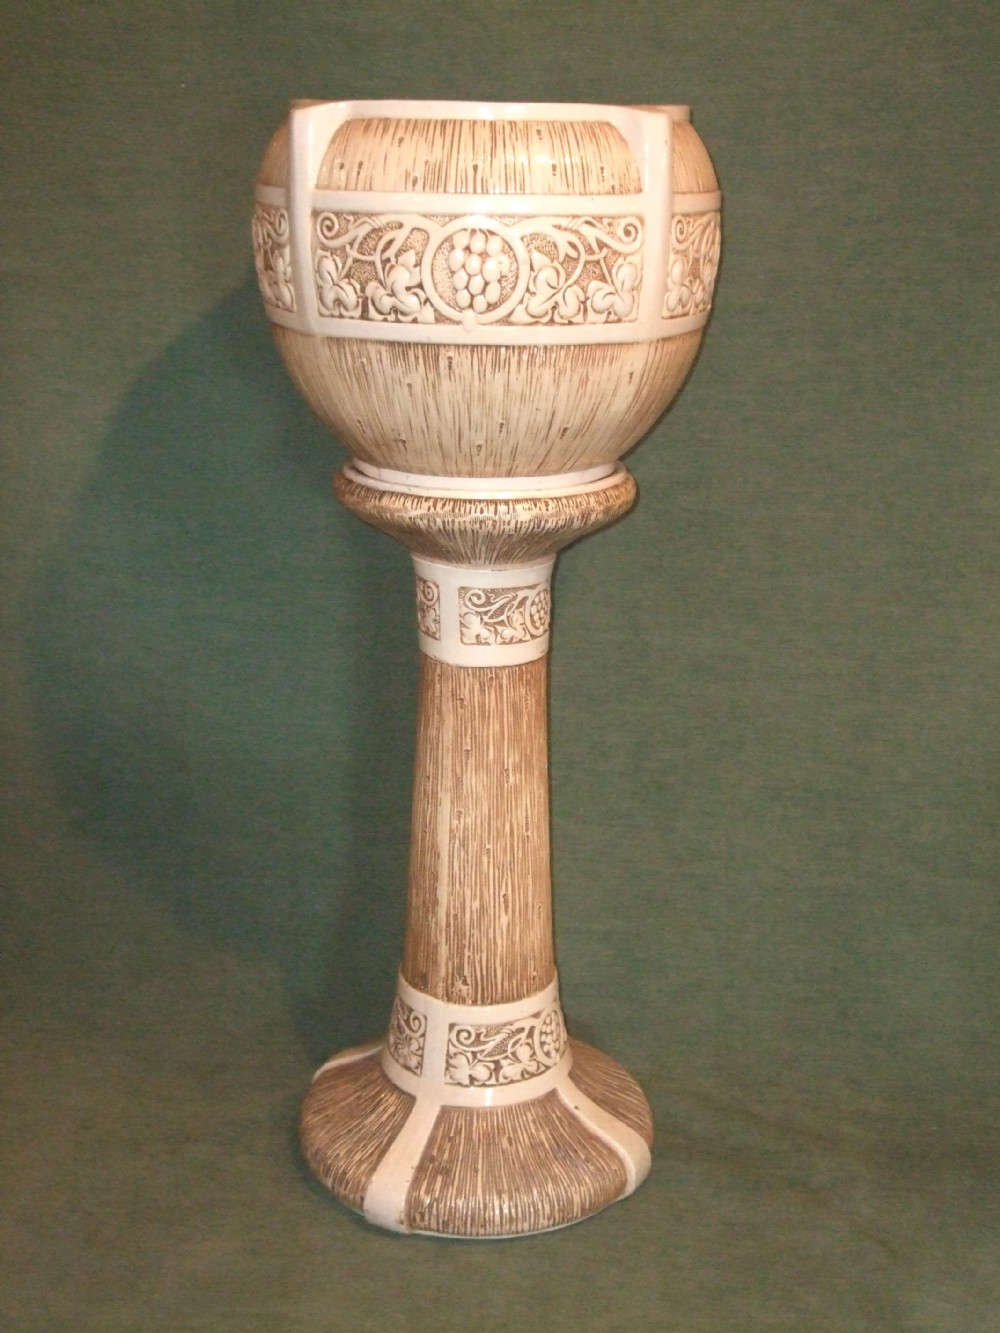 edwardian jardinire on stand made by bretby